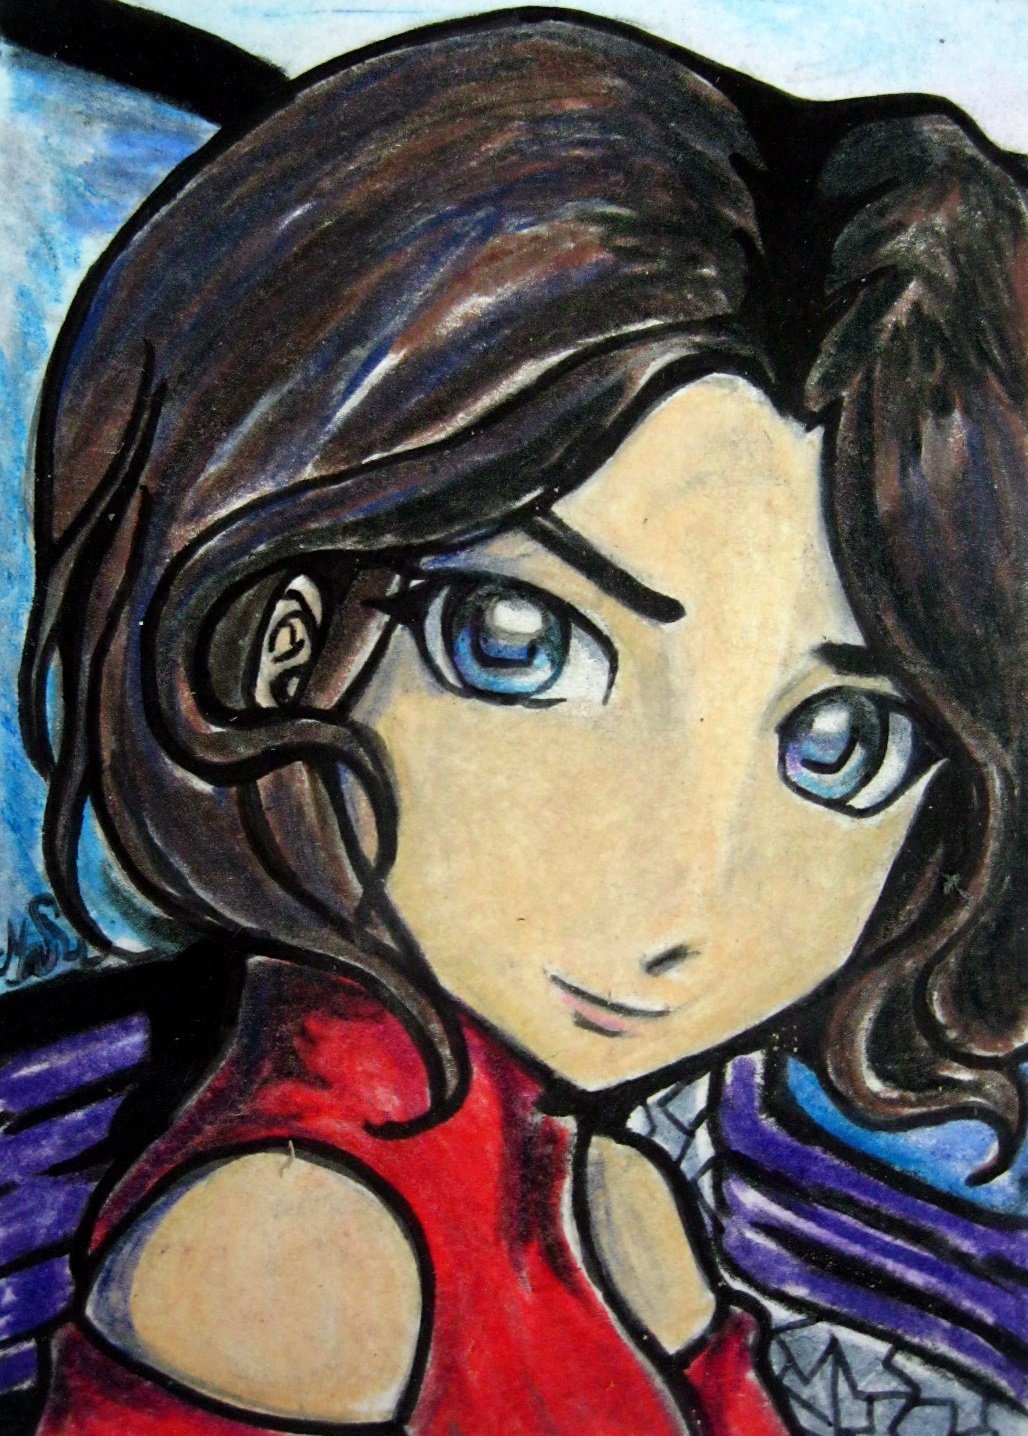 Original Concept Art Maiyuri Japanese Anime Original Sketch Card Drawing ACEO PSC 1/1 by Maia